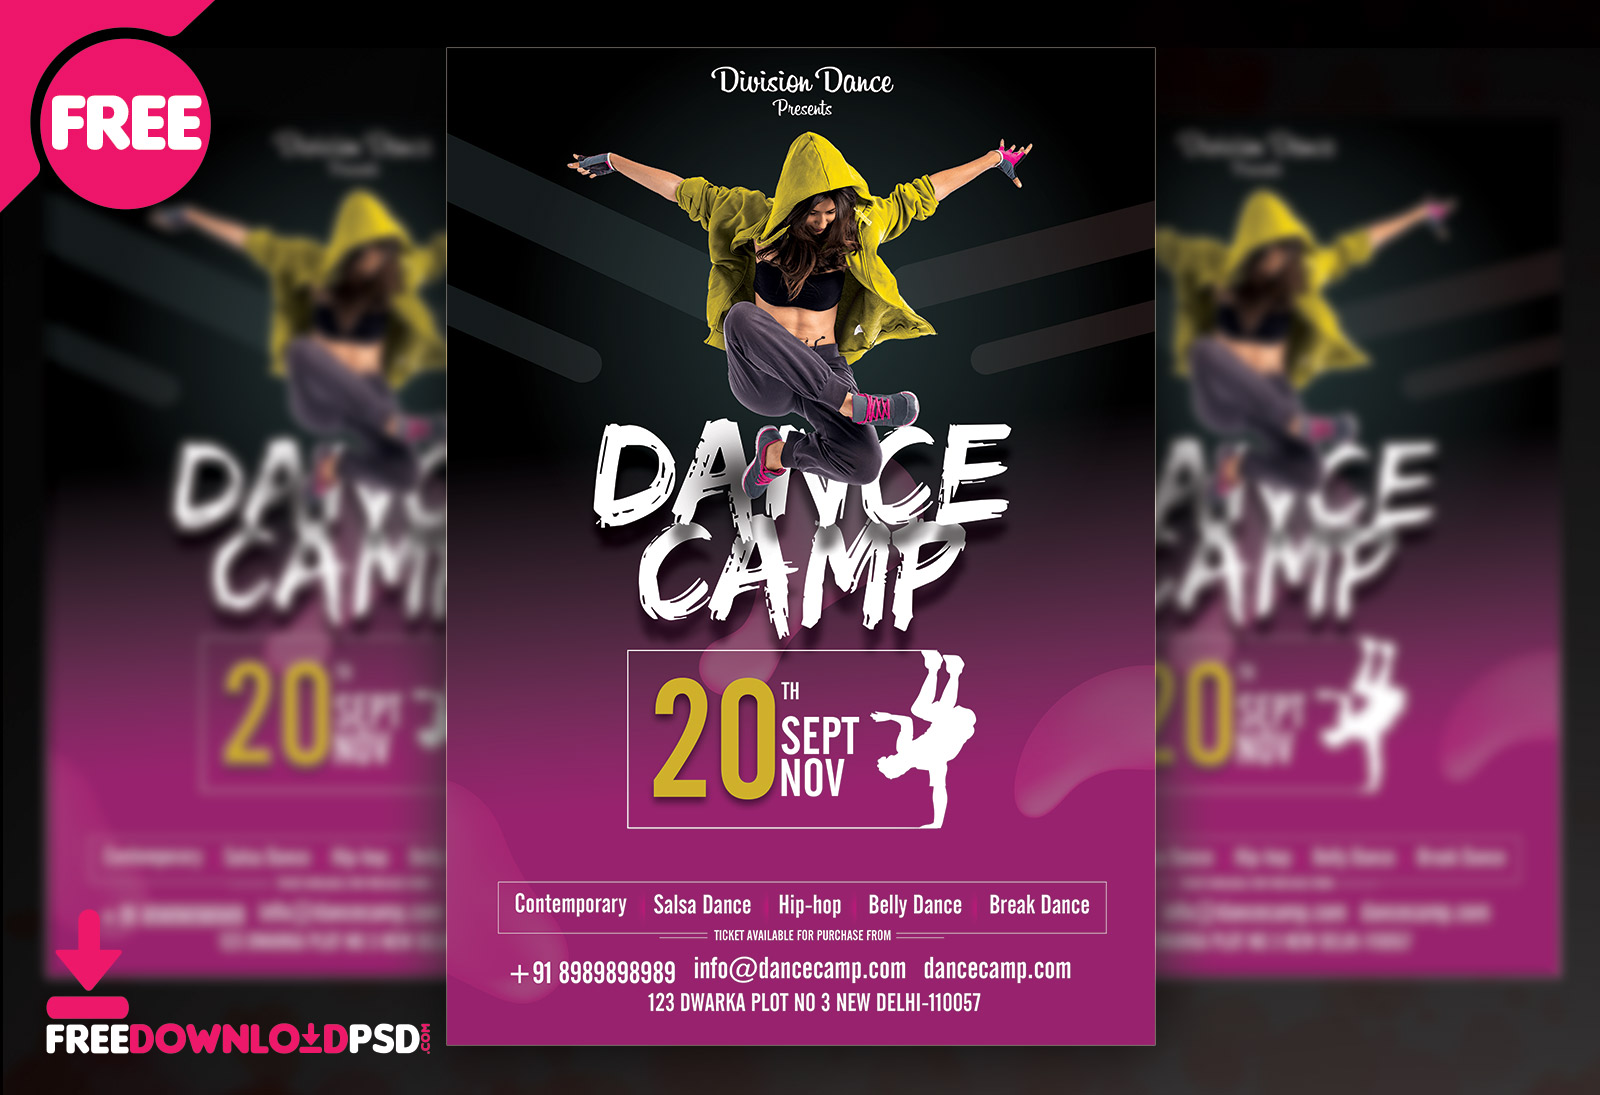 Dance Camp Flyer Free Psd  FreedownloadPSD.com With Dance Flyer Template Word